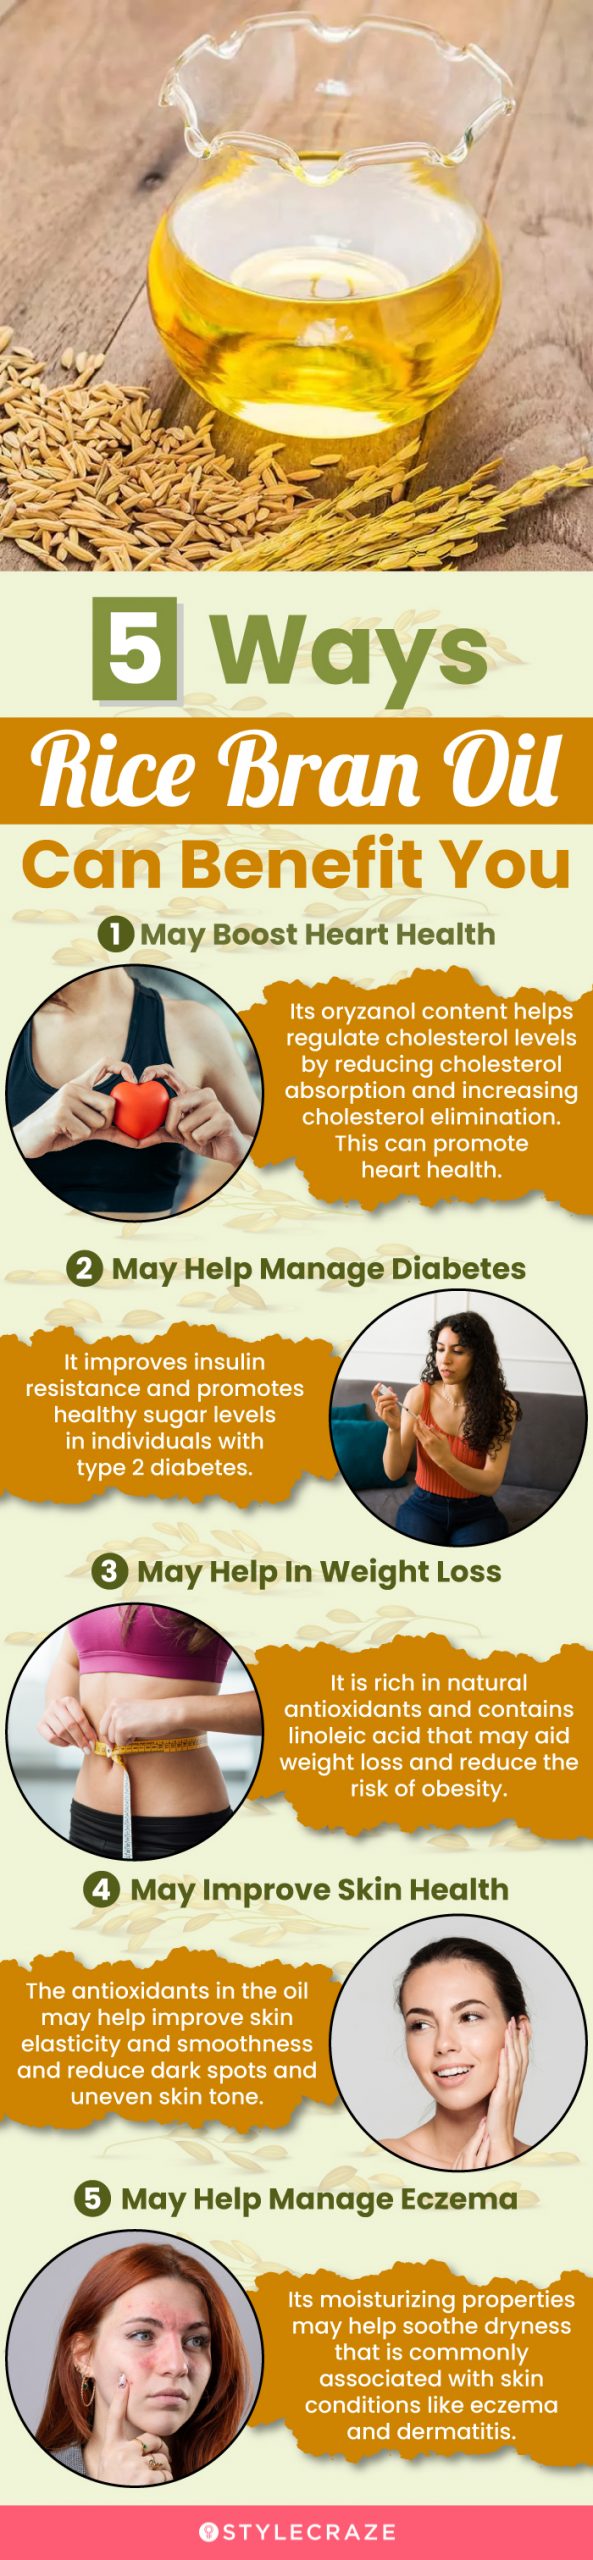 5 ways rice bran oil can benefit you (infographic)